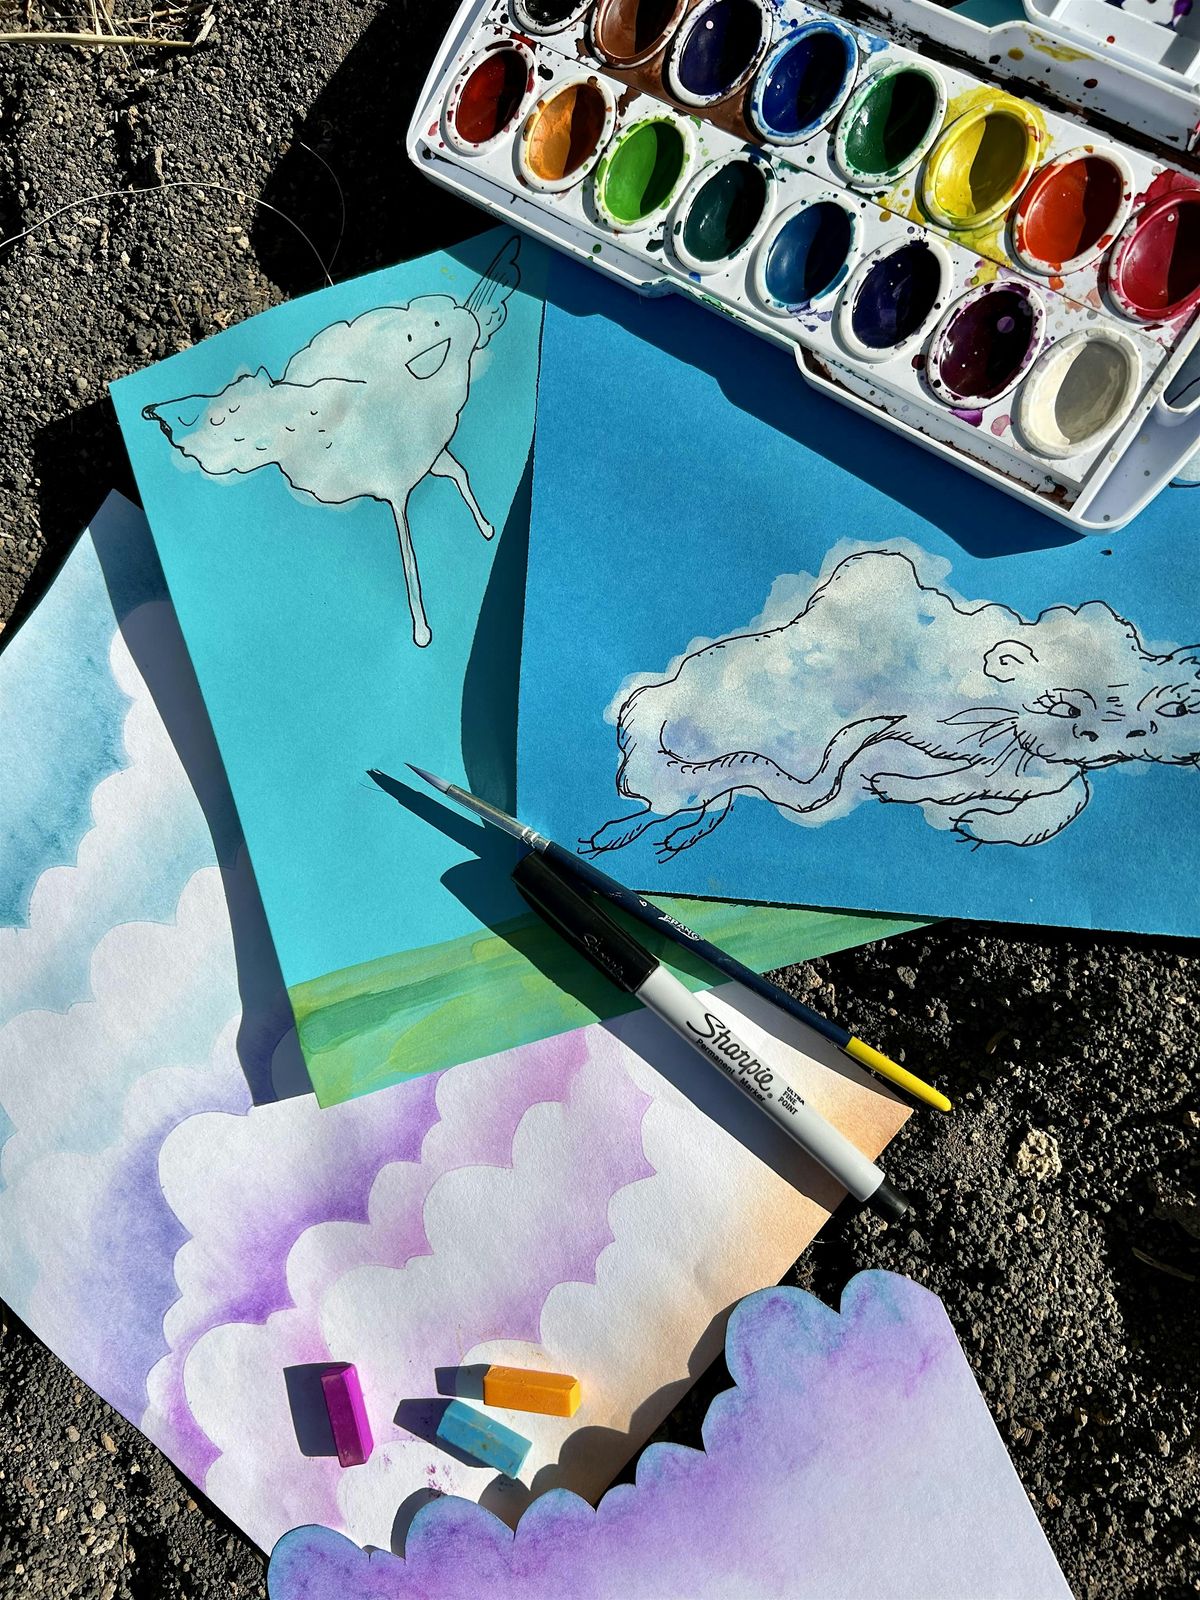 Youth Art Workshop - Creative Clouds